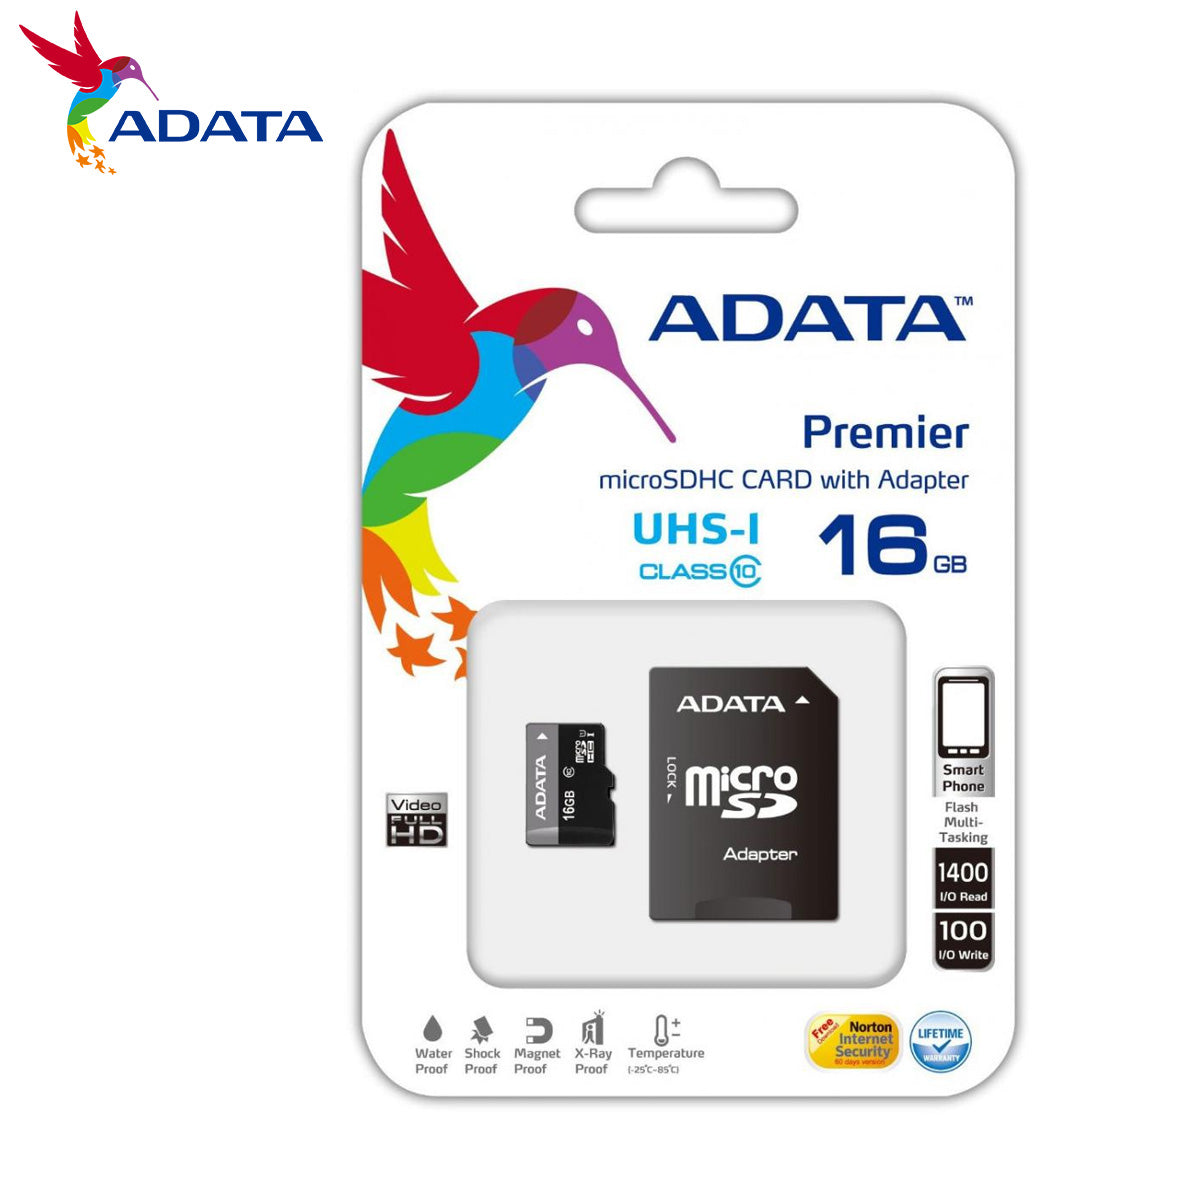 ADATA MICROSDHC 16GB UHS-I CLASS10 85 RETAIL SPEED UP TO 100MB/S